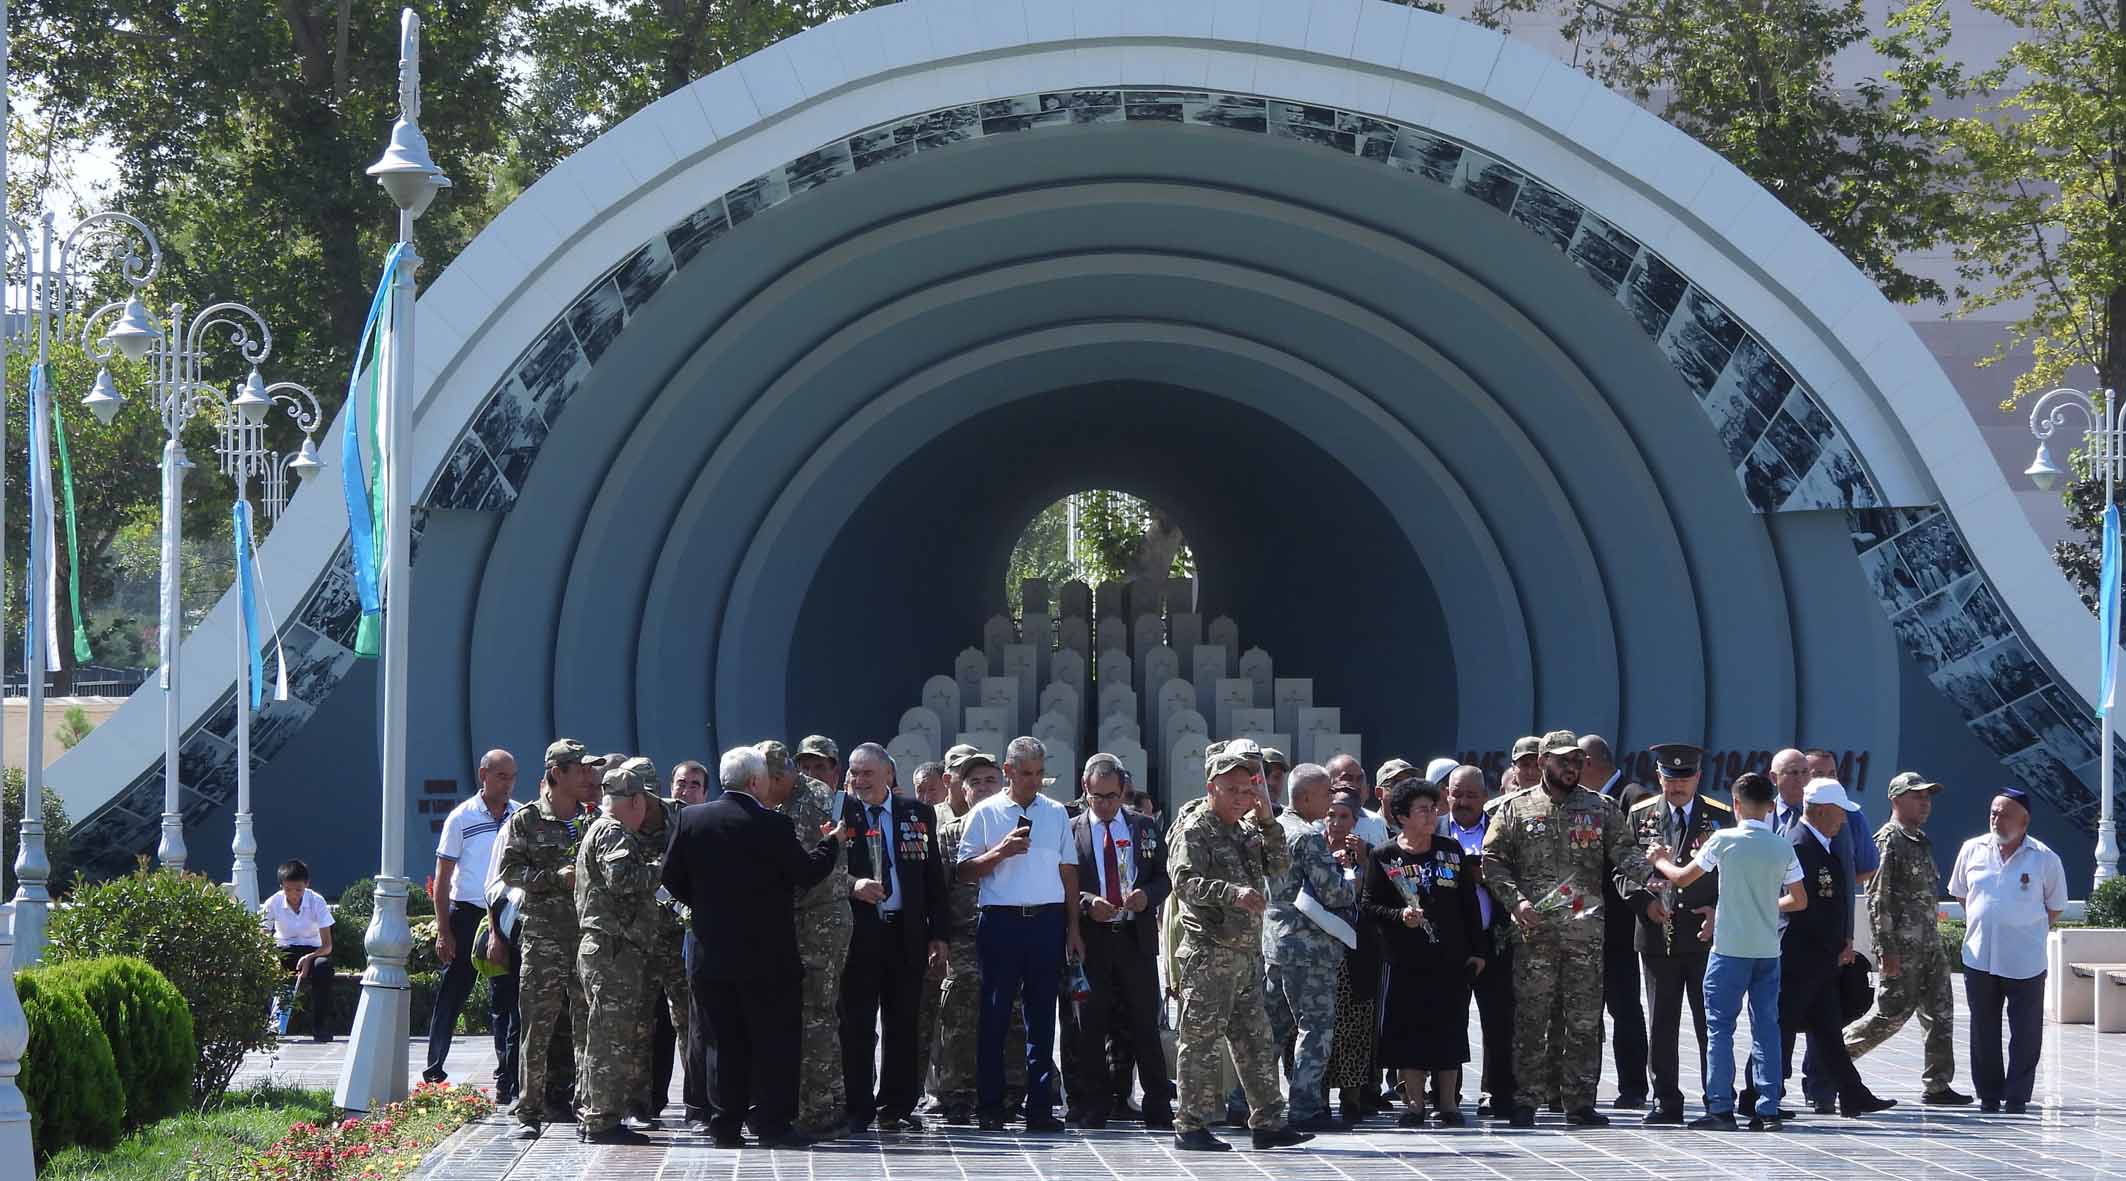 A festive program was held in the memorial complex "Victory Park" in connection with the thirty-first anniversary of the independence of the Republic of Uzbekistan with the participation of members of the Association "VETERAN" of veterans and disabled people of Uzbekistan.